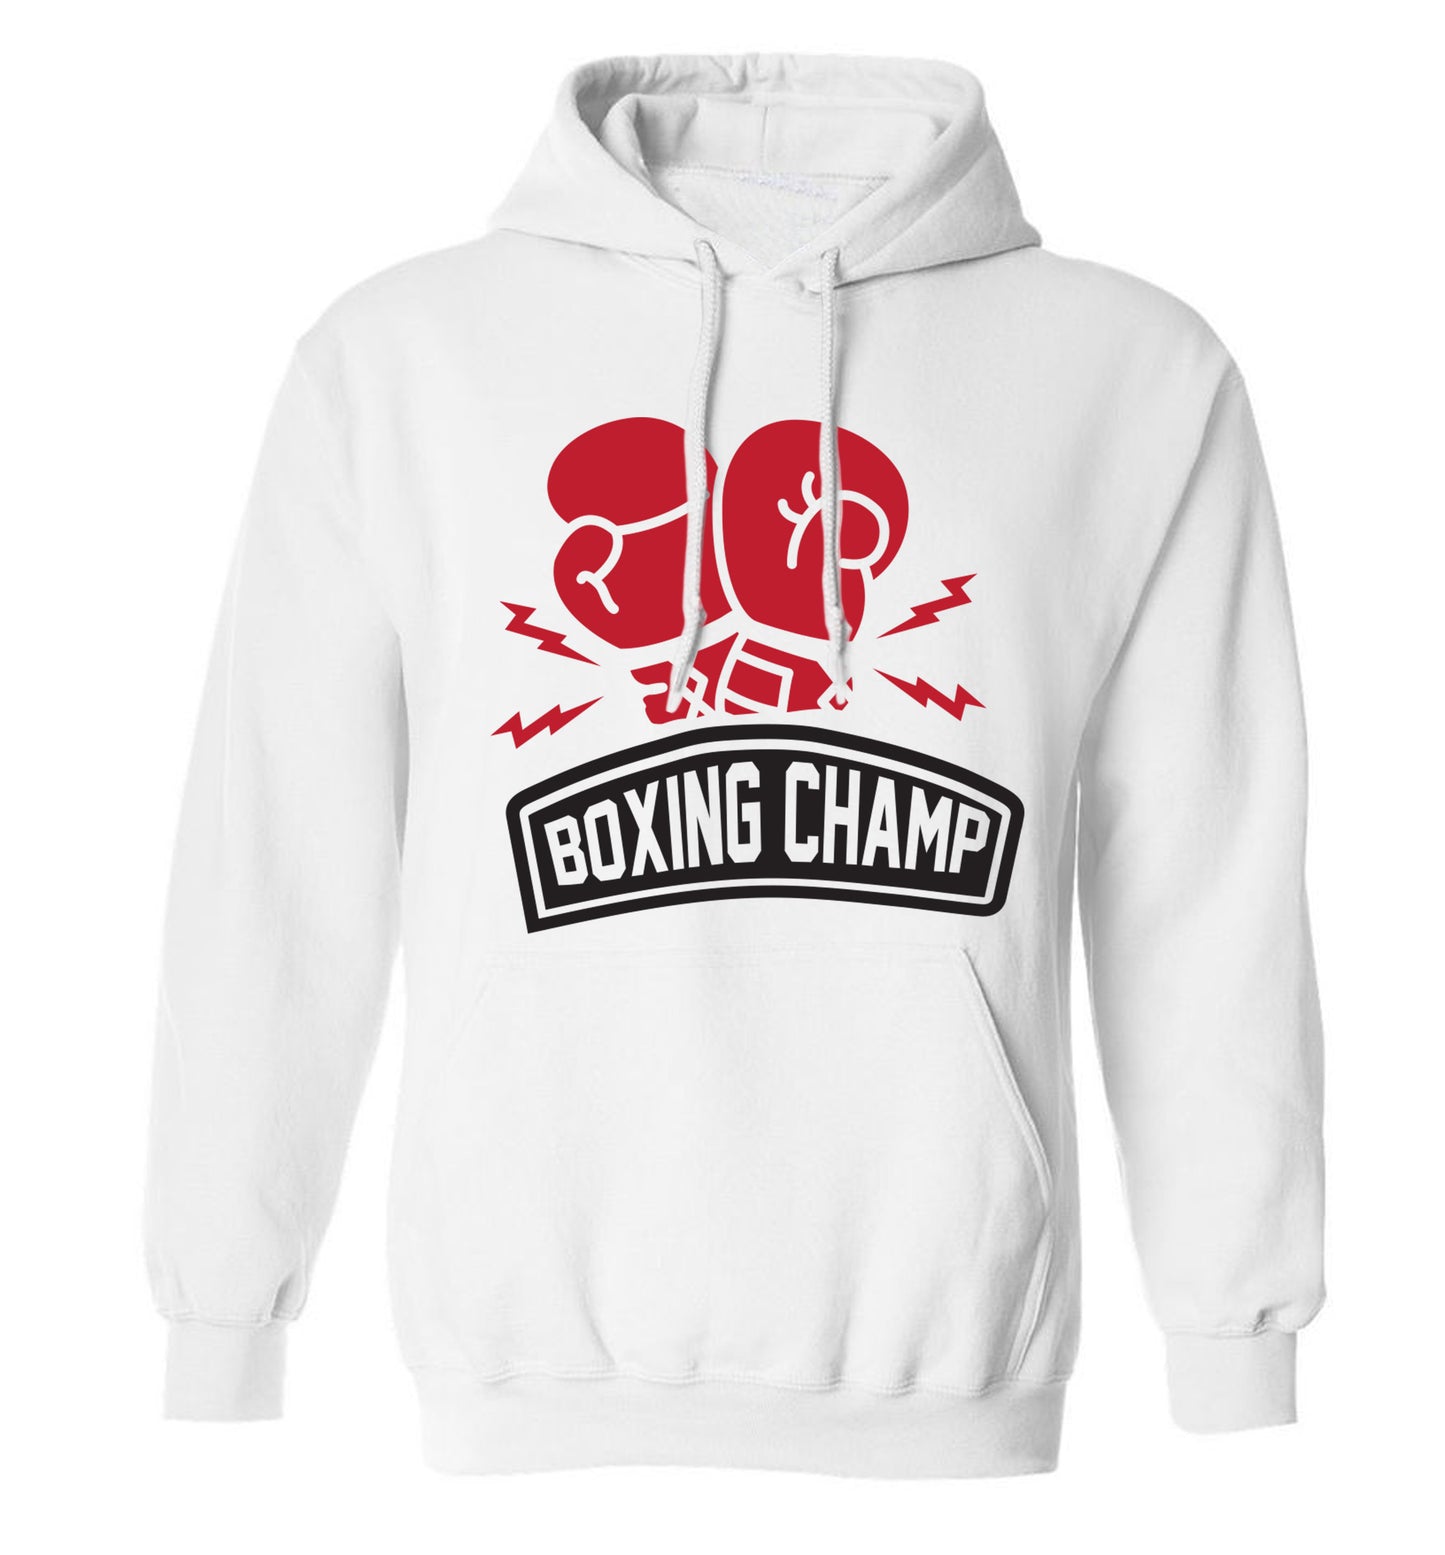 Boxing Champ adults unisex white hoodie 2XL